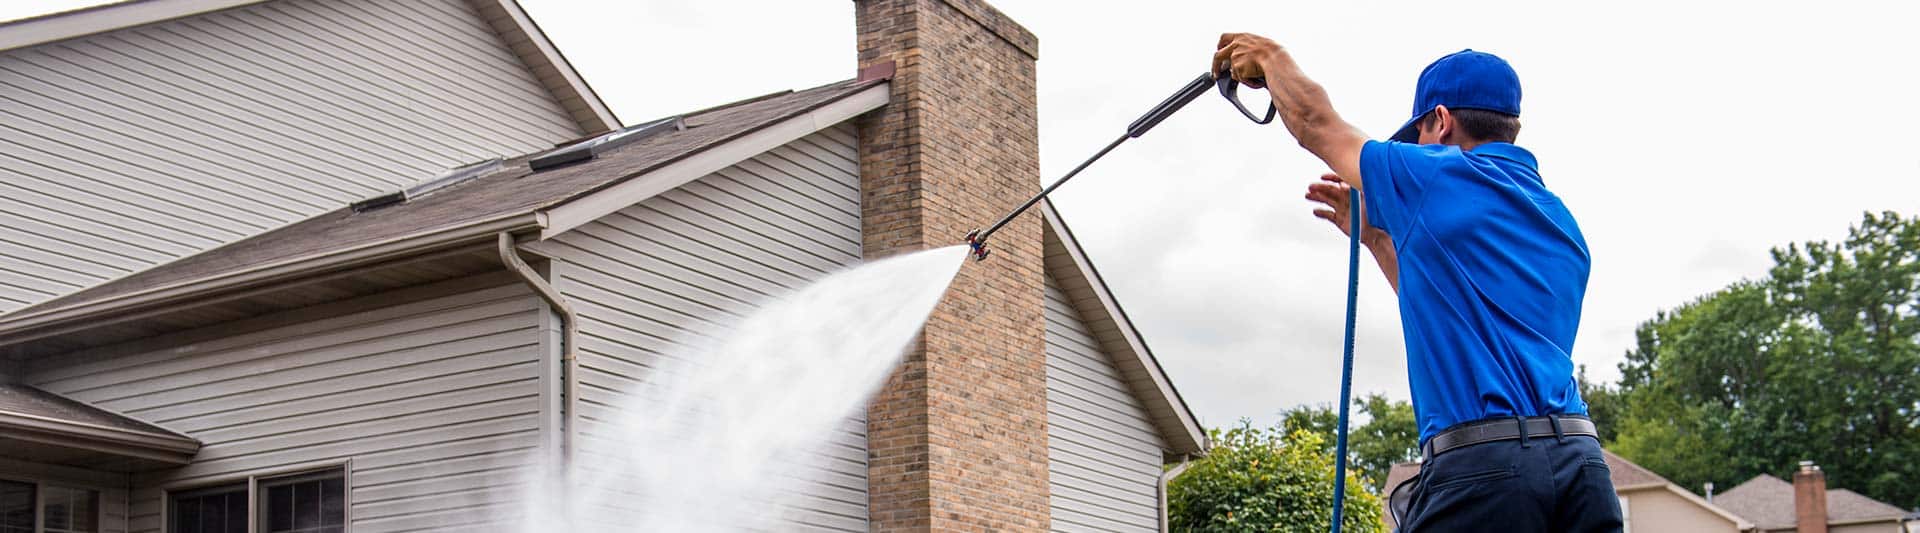 Roof Cleaning Services In Cecil Pa